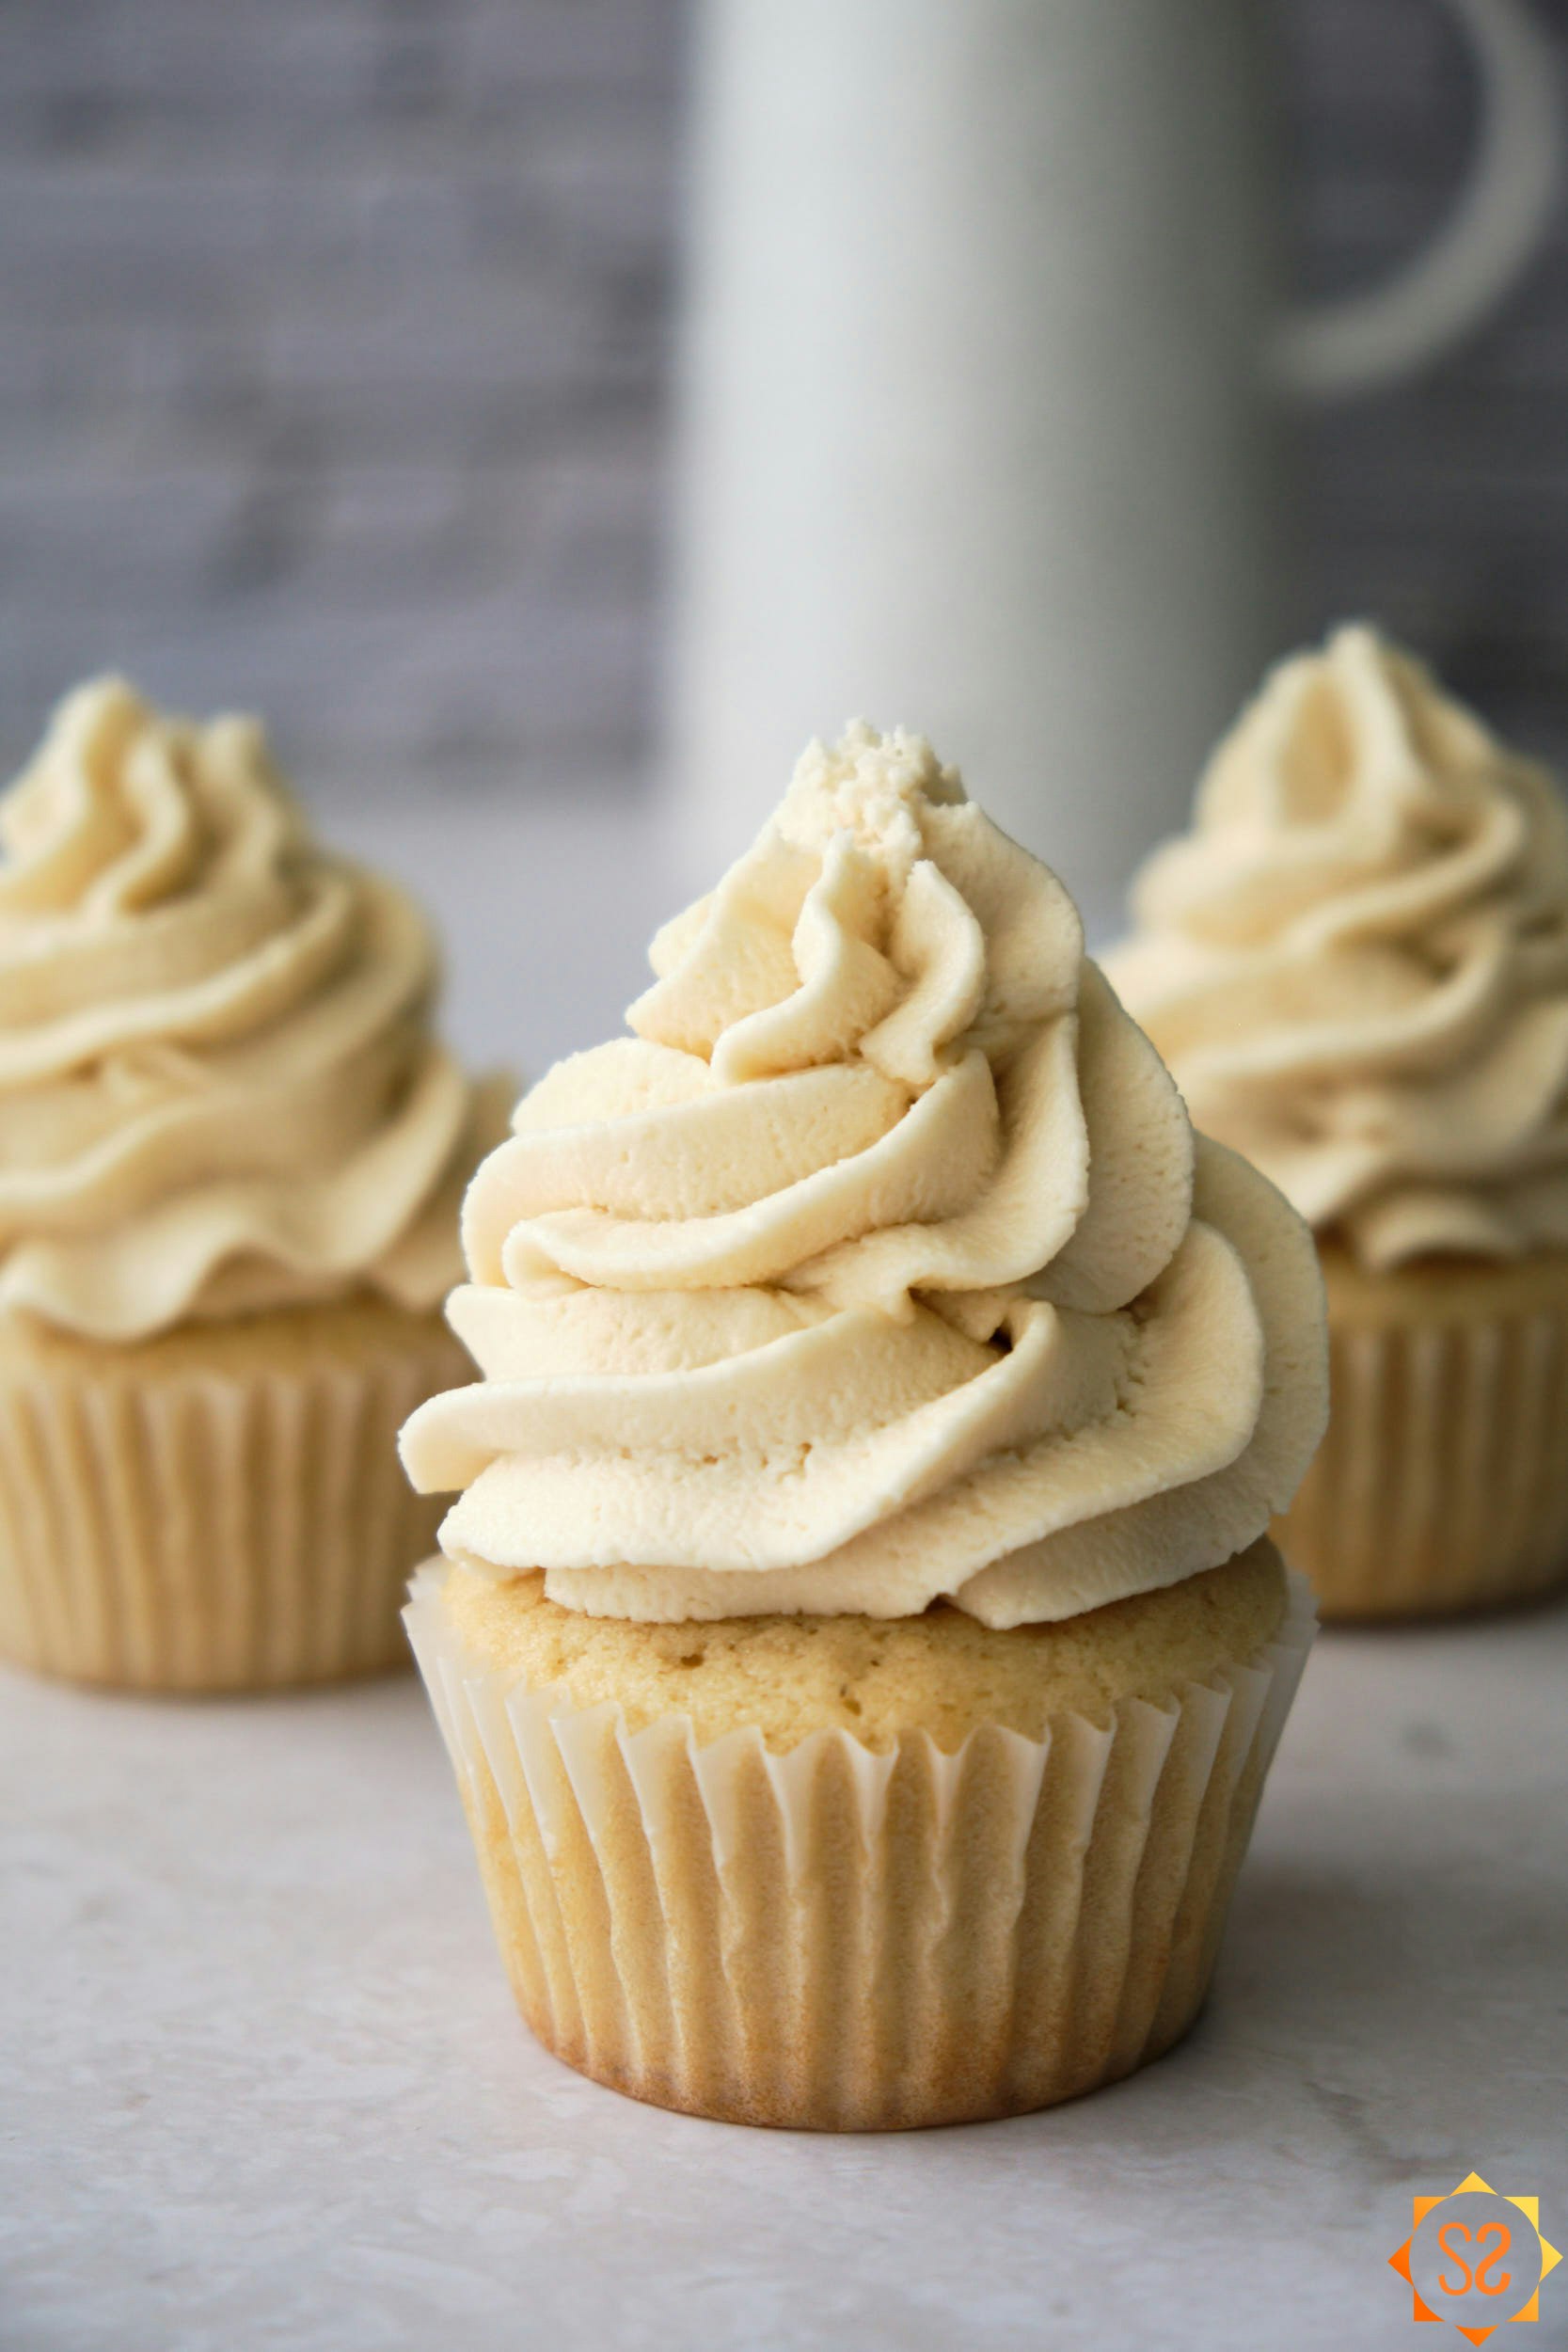 Three vanilla cupcakes topped with vegan buttercream frosting.